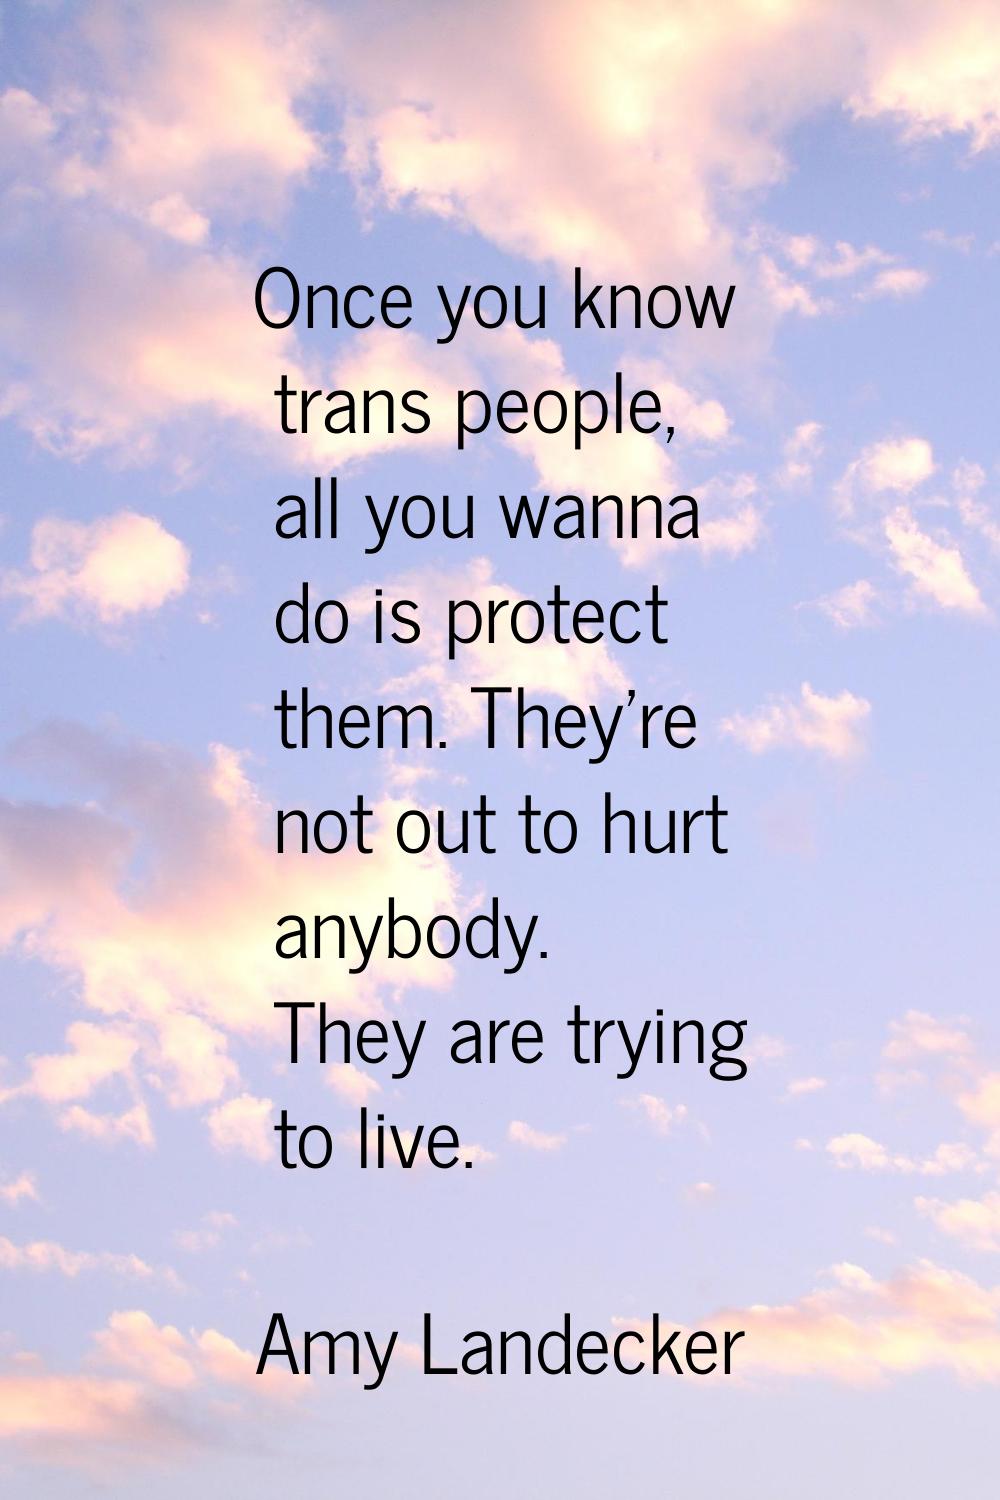 Once you know trans people, all you wanna do is protect them. They're not out to hurt anybody. They